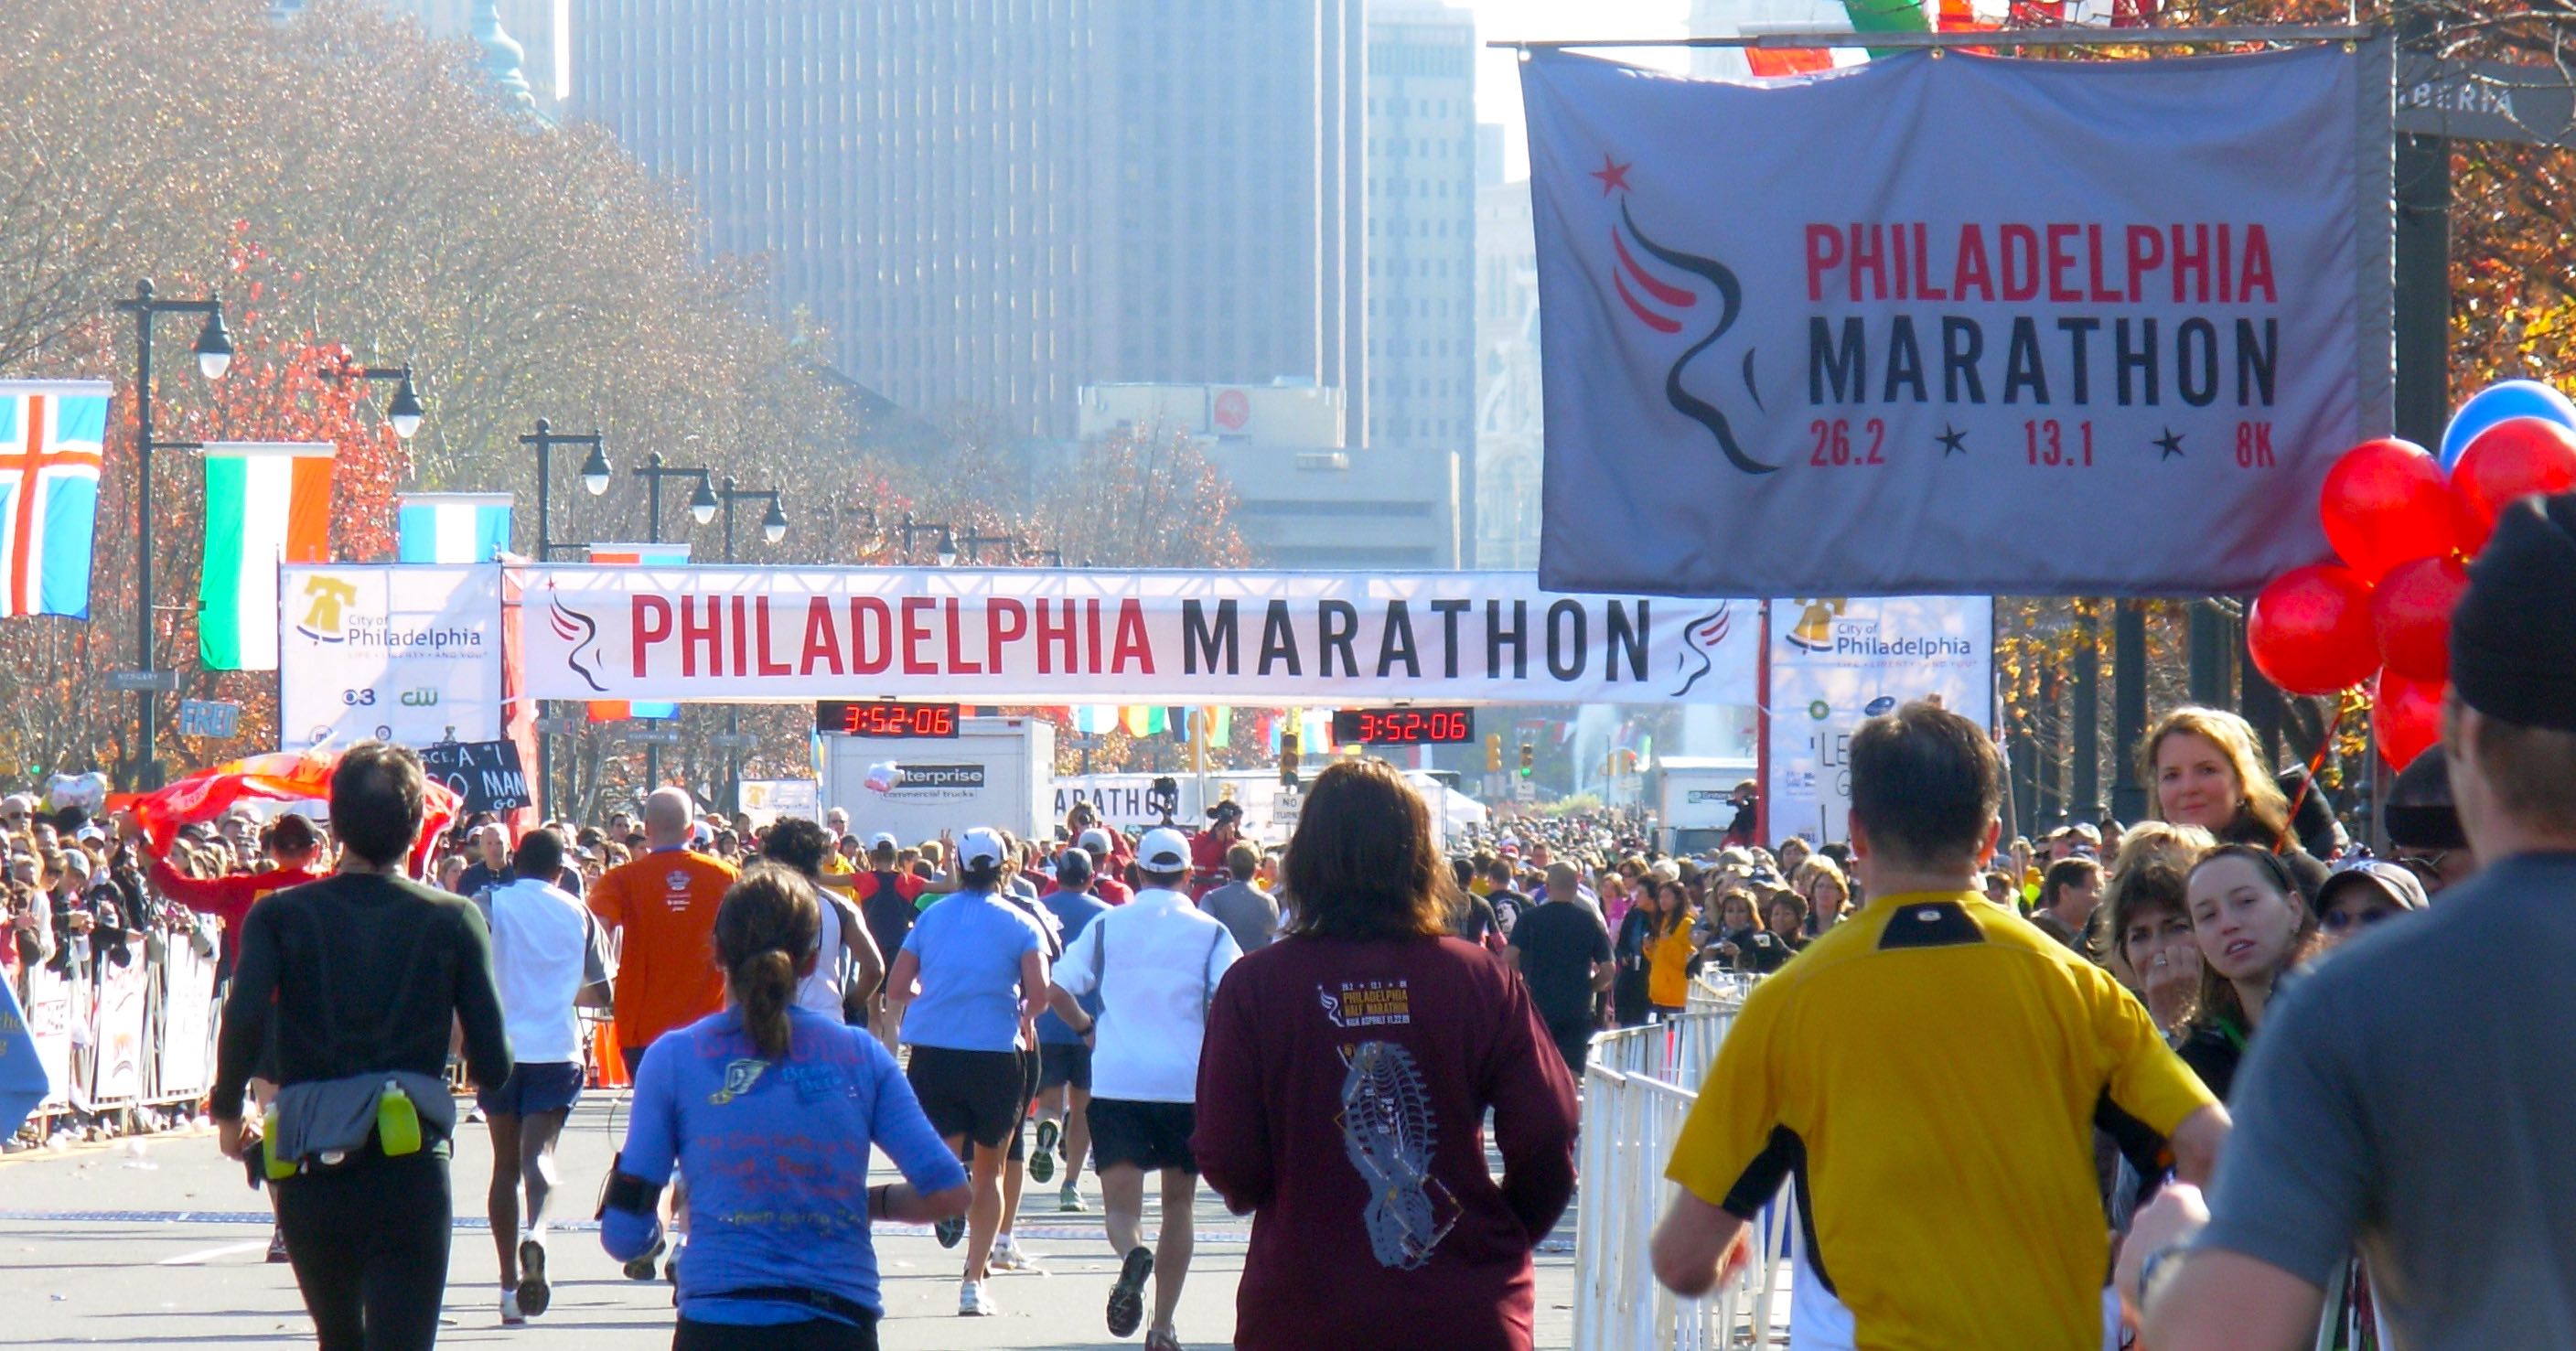 Philadelphia Marathon Guide 2018 Everything You Need to Know for